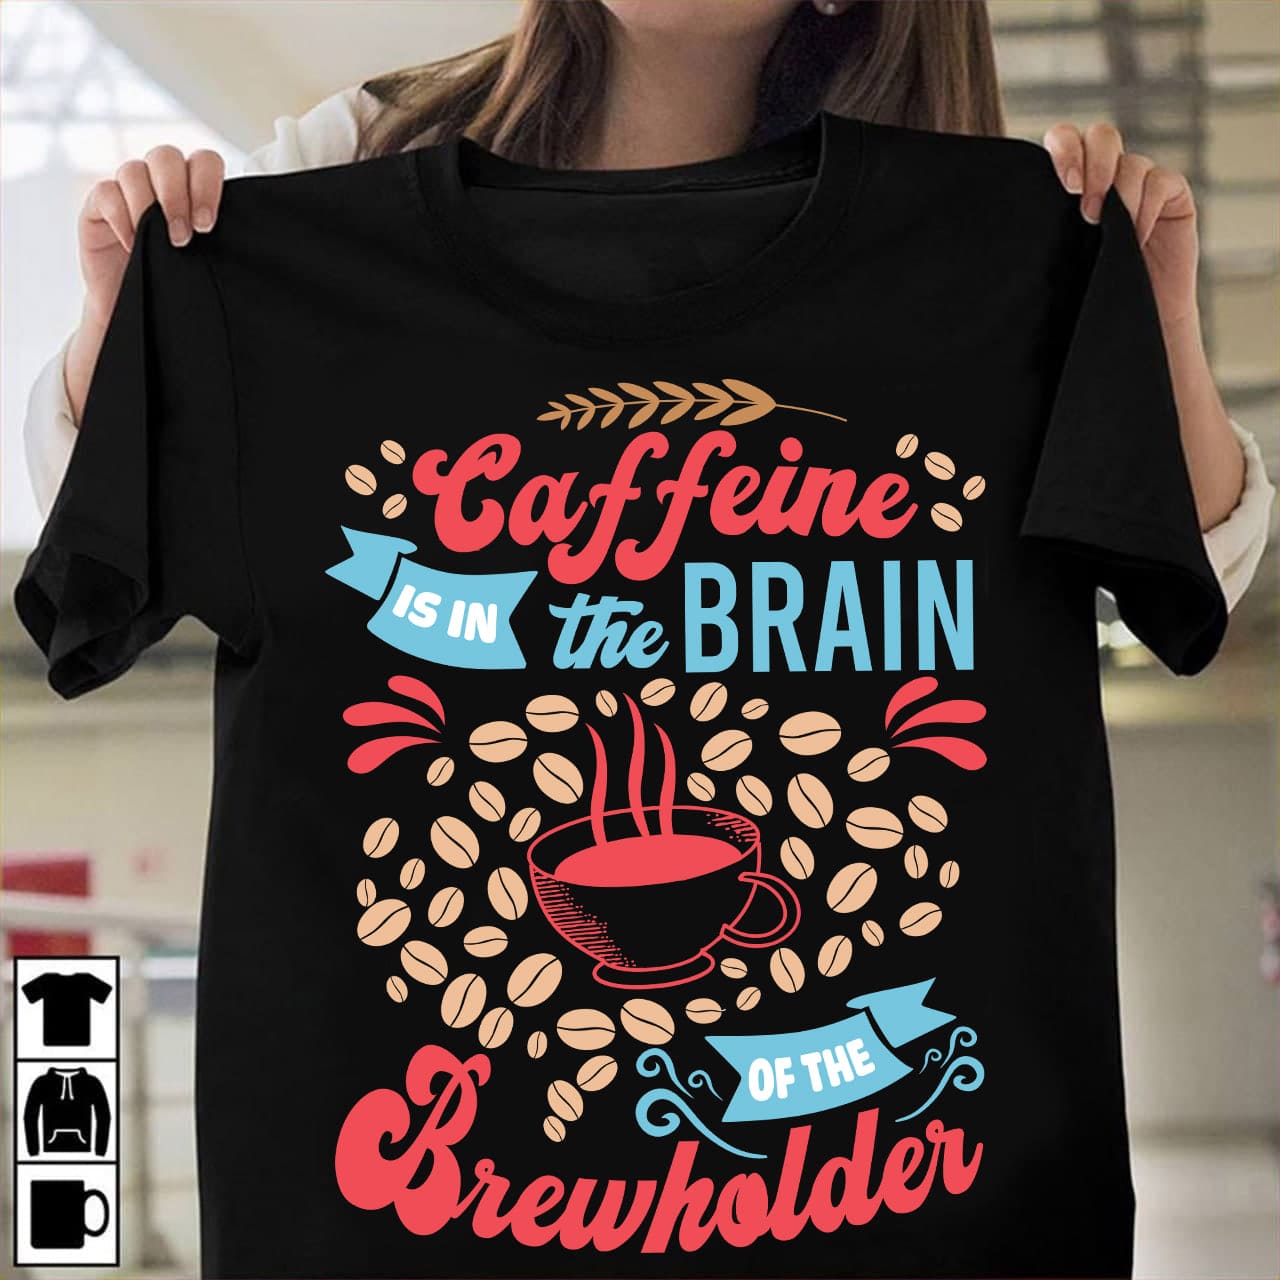 Caffein is in the brain of the brewholder - Brew coffee lover, gift for caffeine addtion